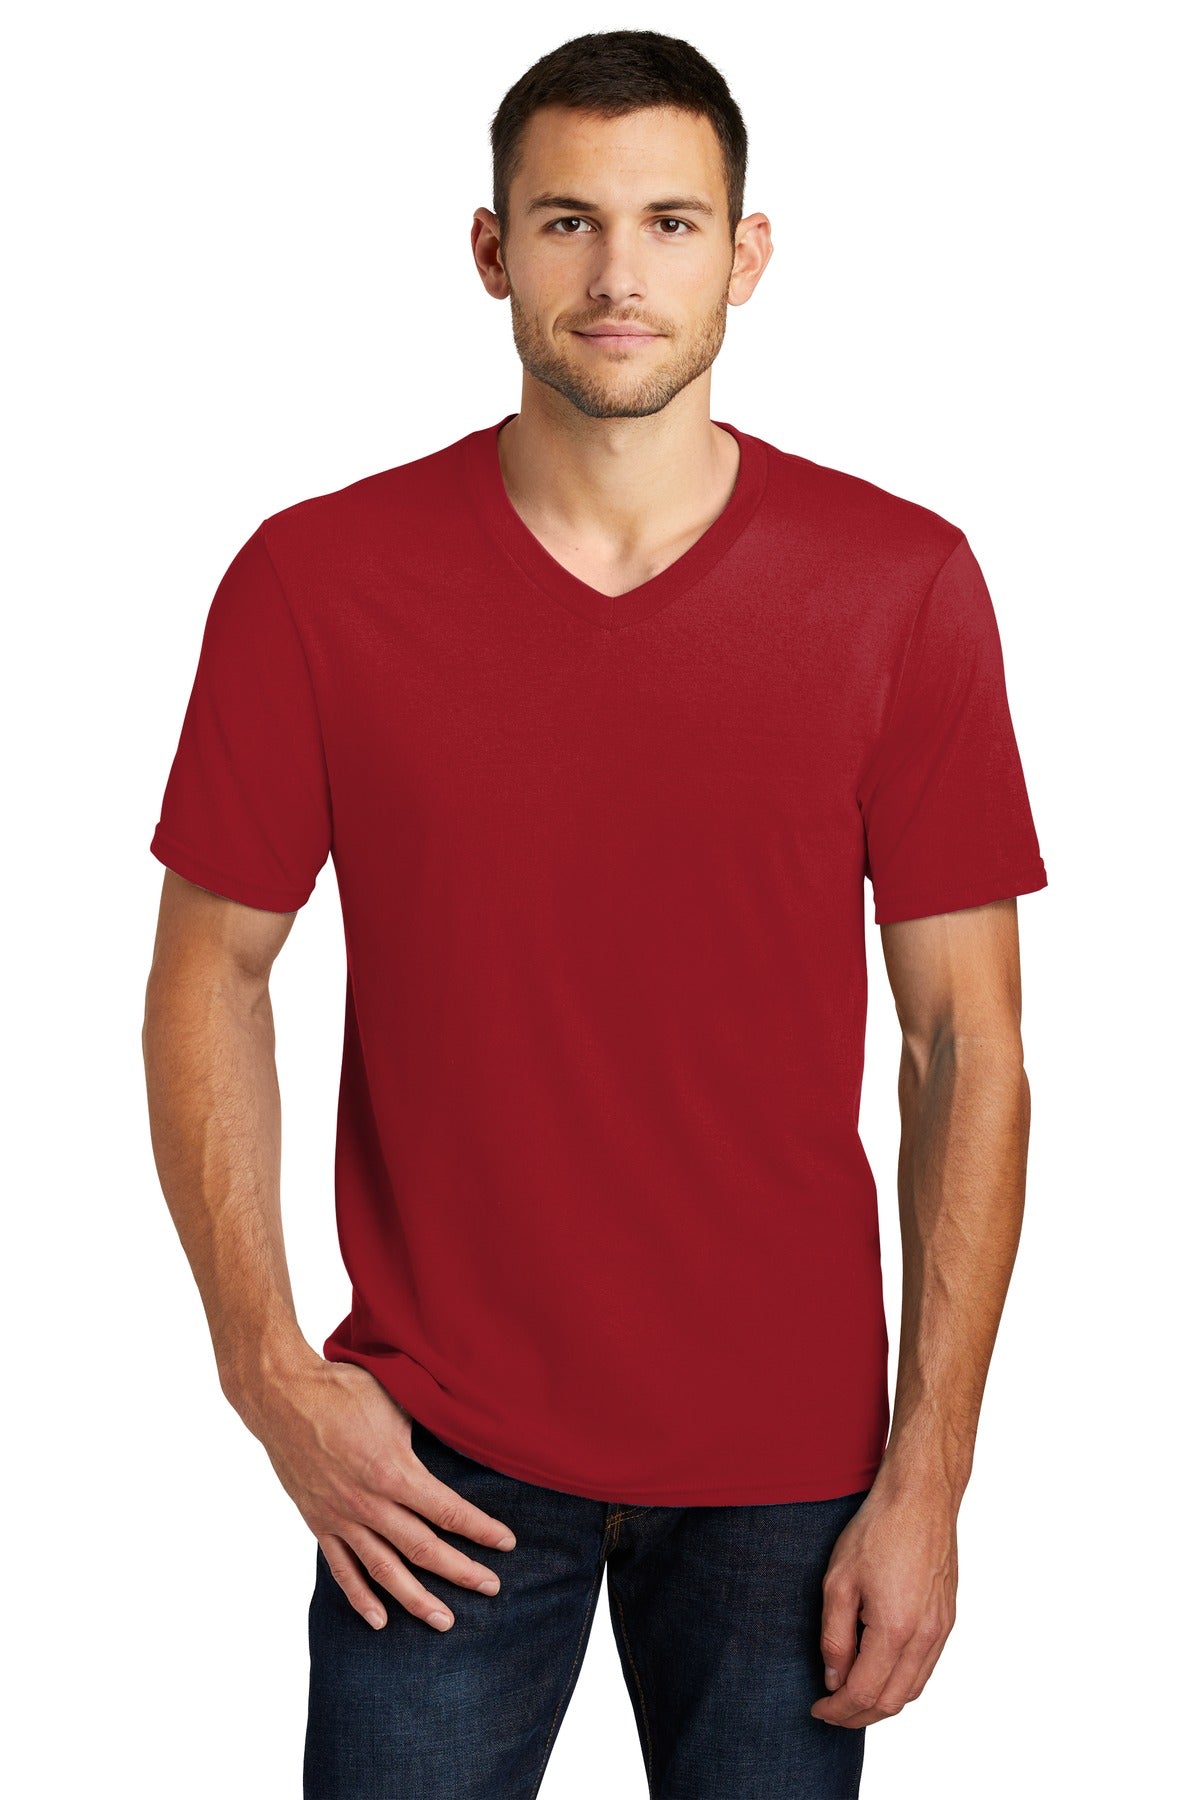 District® Very Important Tee® V-Neck. DT6500 - DFW Impression